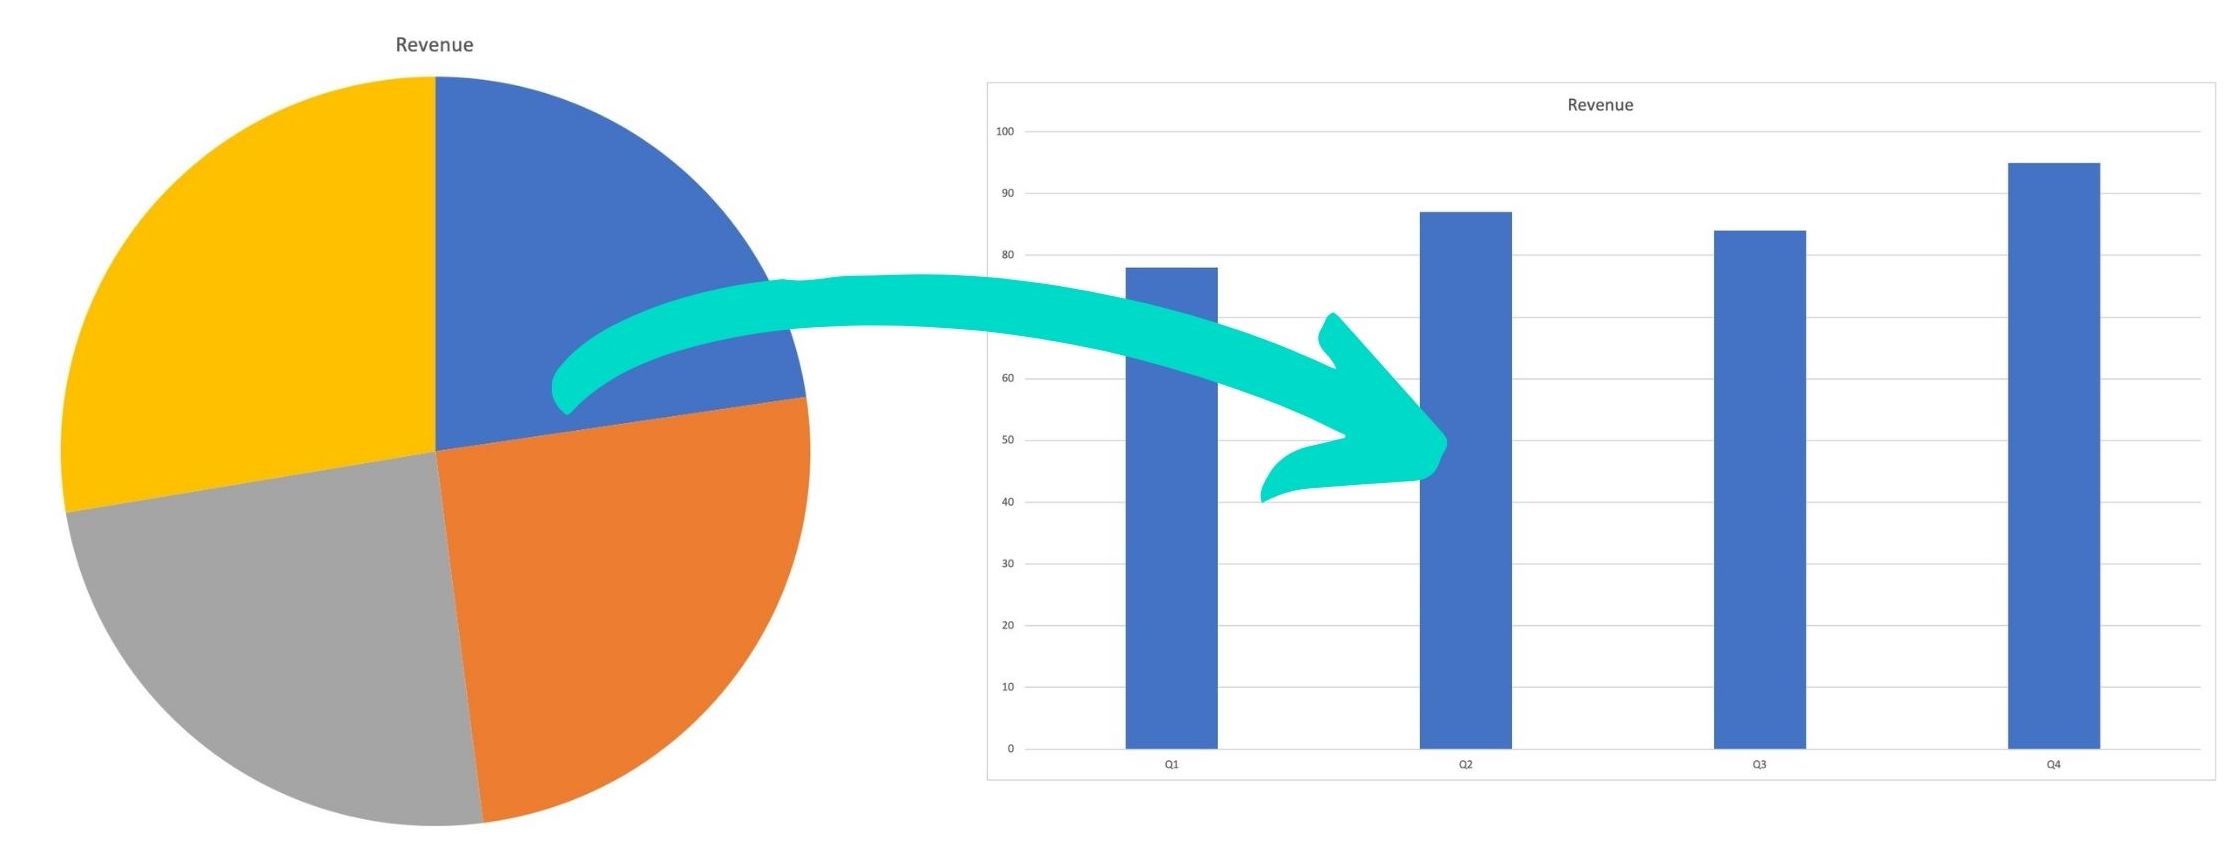 Using a pie chart for a revenue graph would be silly, use a bar or line chart